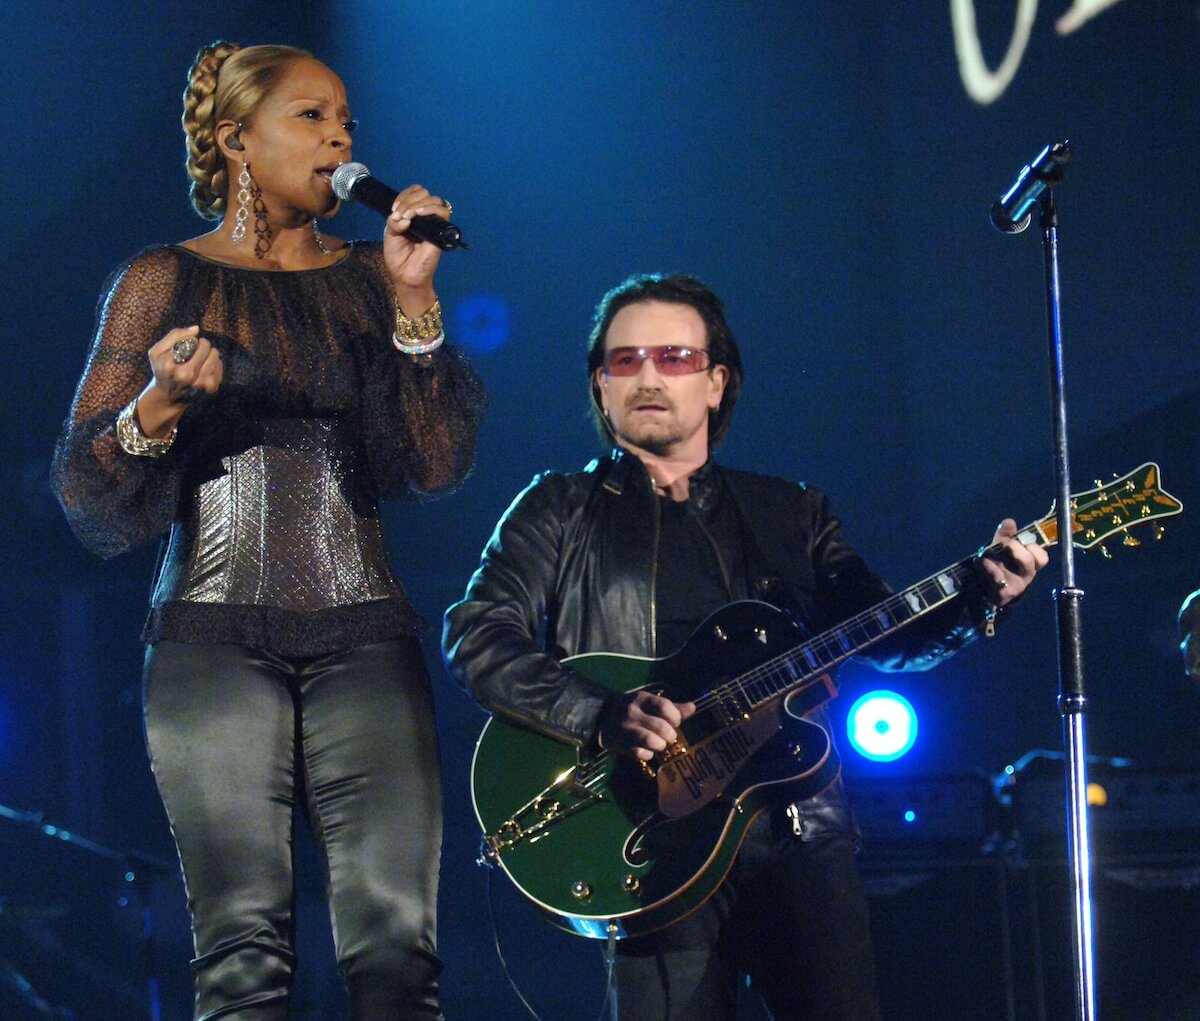 Mary J Blige and Bono performing at the Grammys